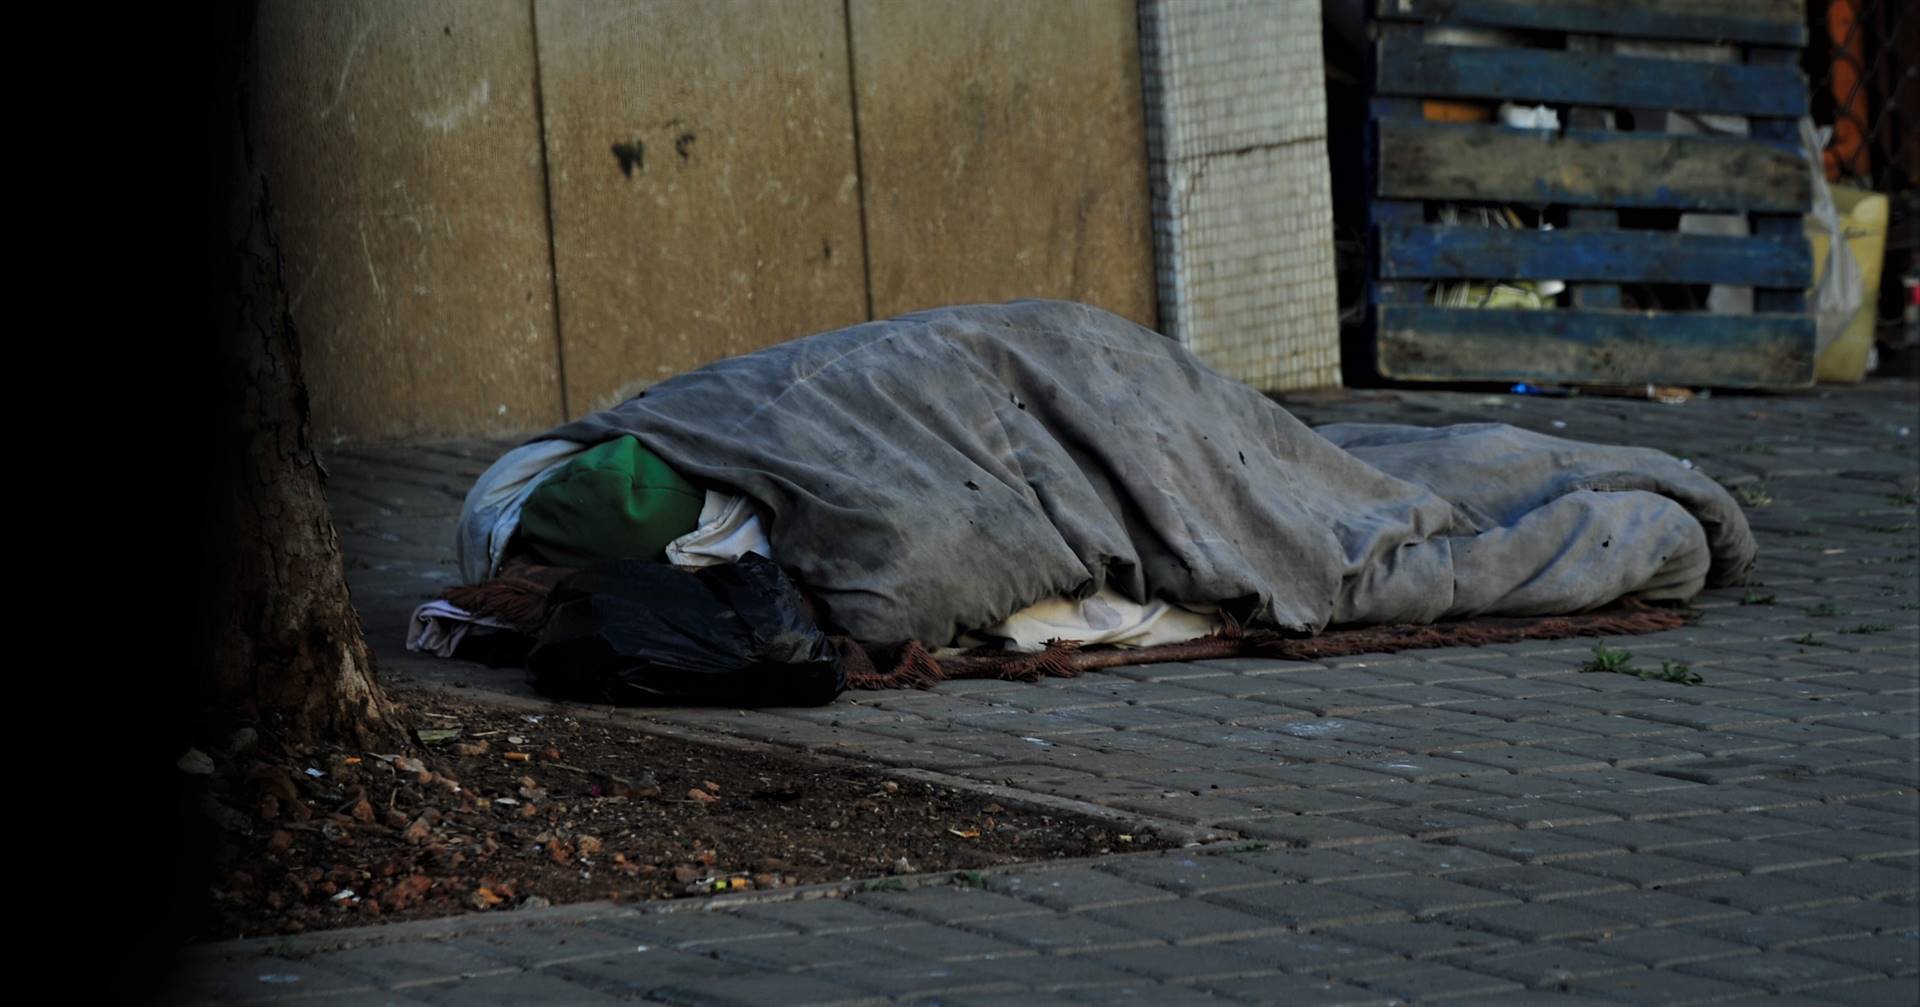 Homeless people are at their own ‘shelters’ in the streets of Braamfontein in Johannesburg. Photo: Rosetta Msimango